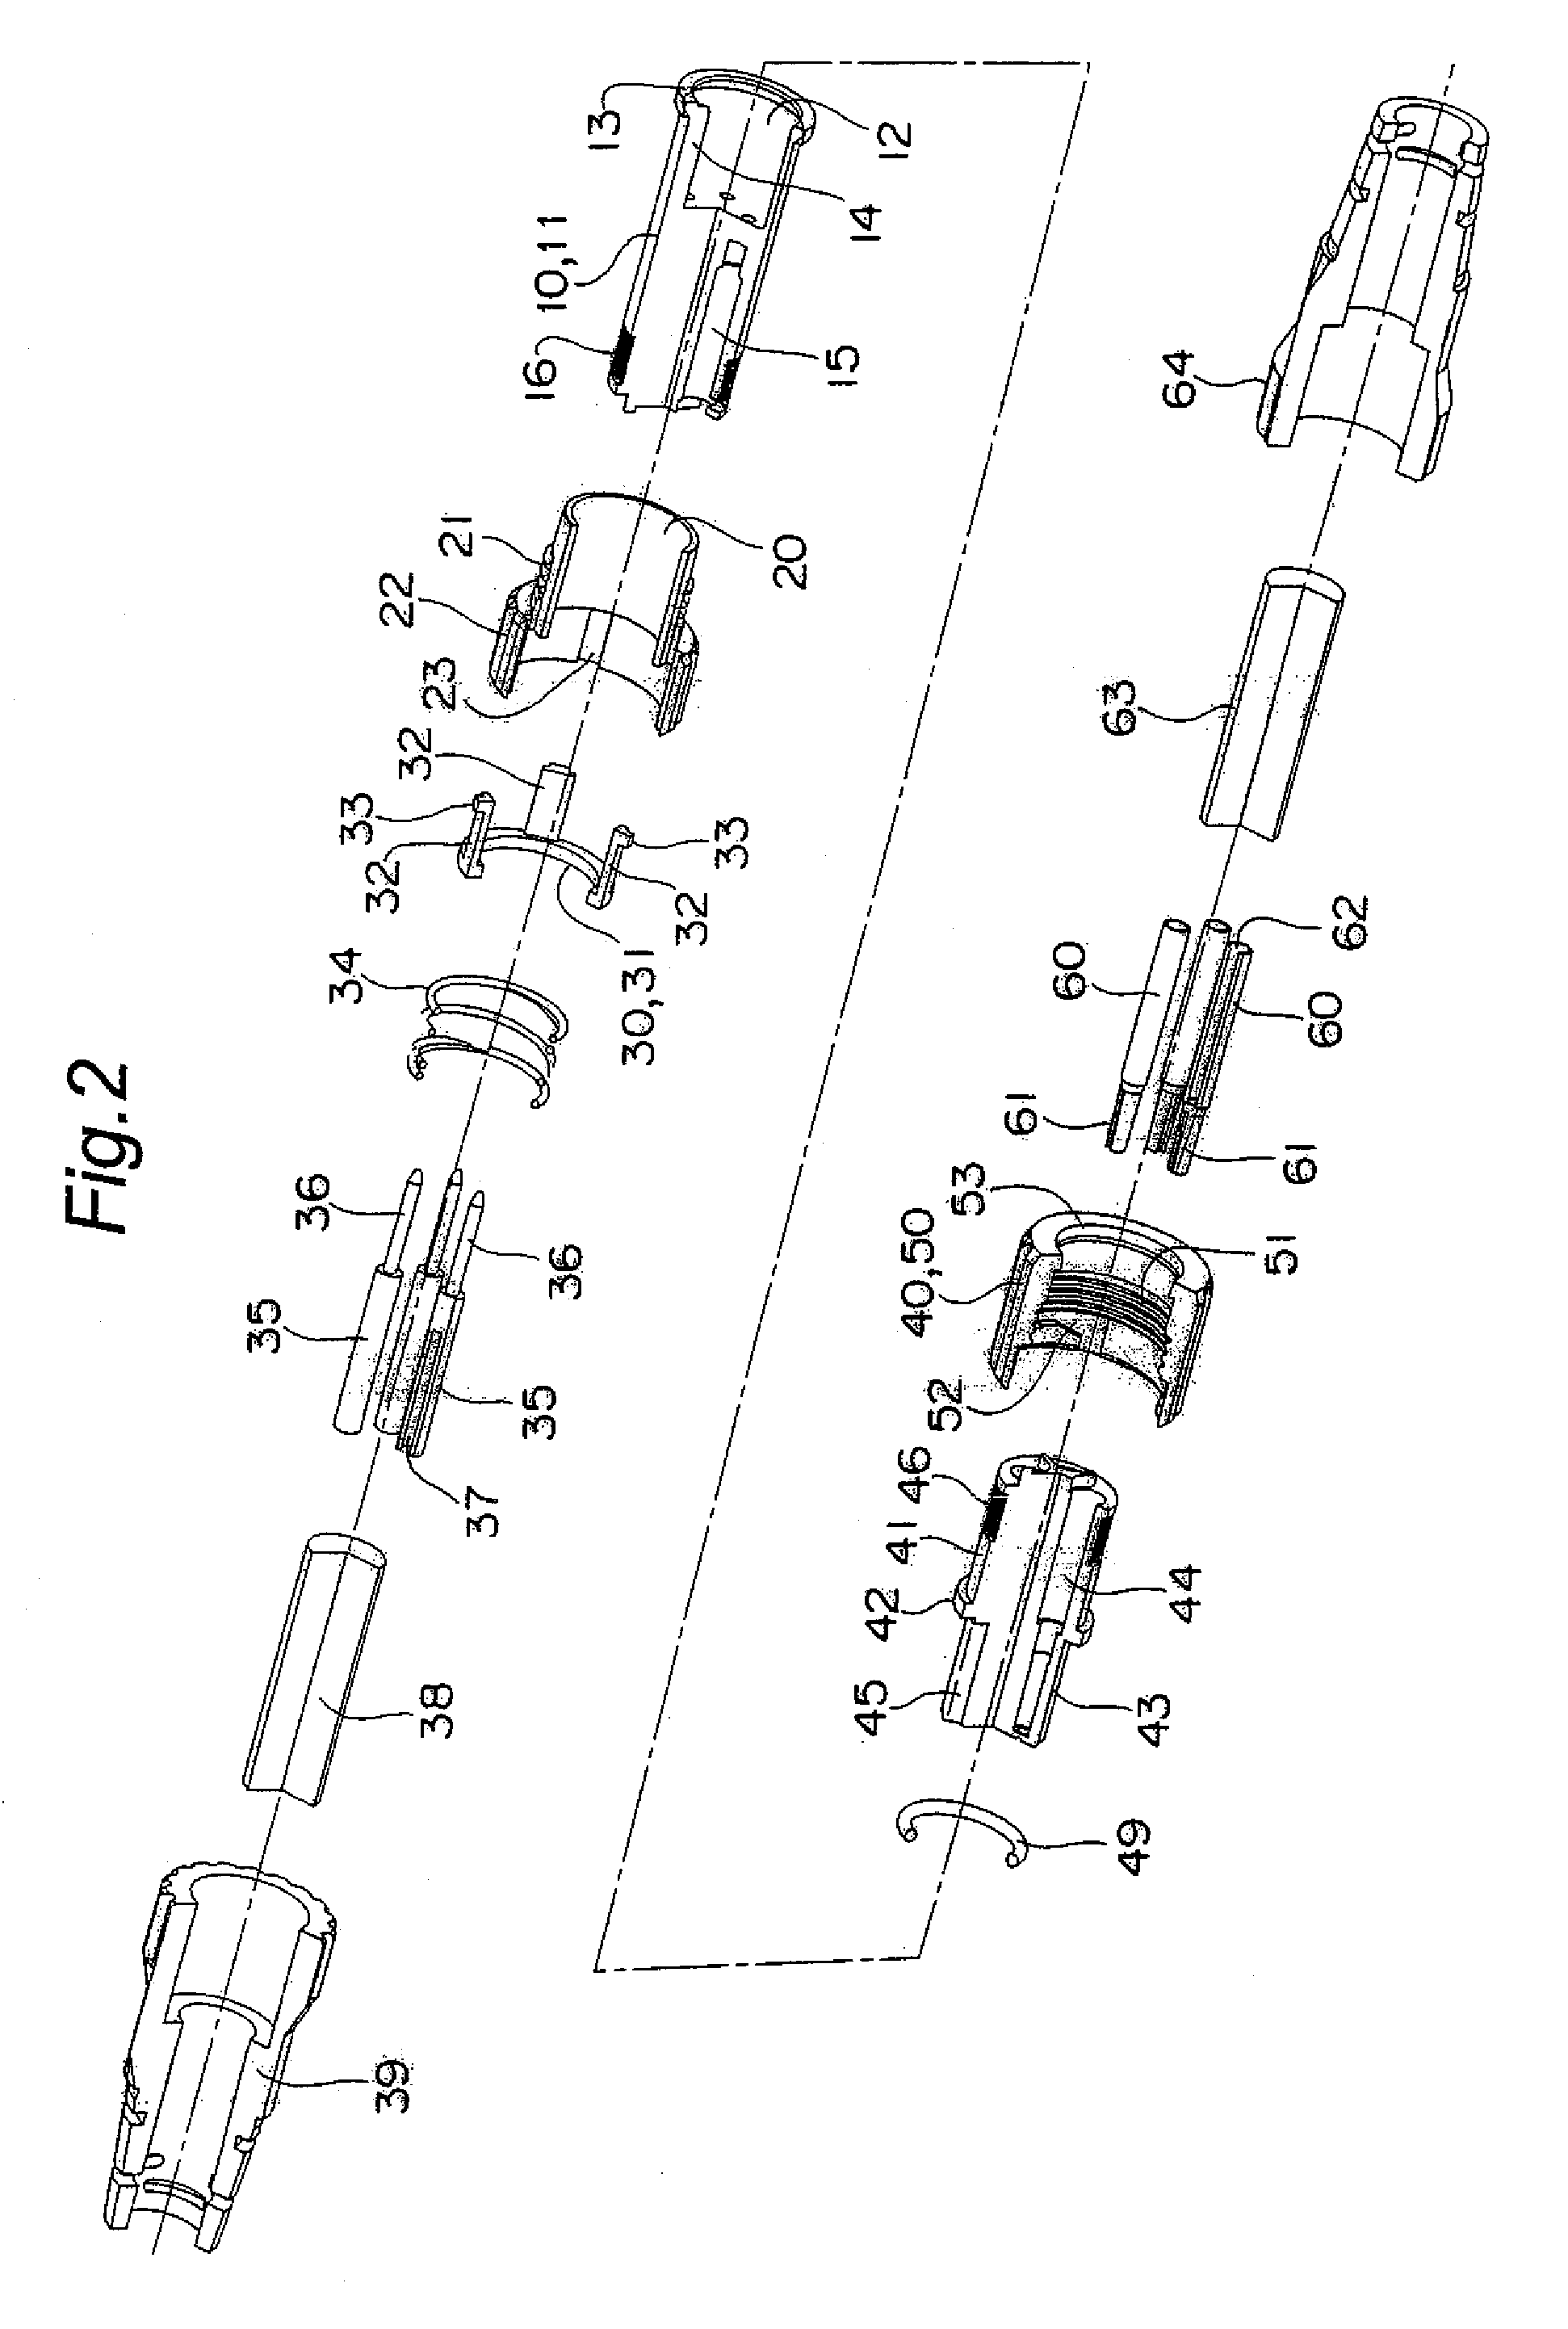 Connector for serving both screw type and bayonet type connectors